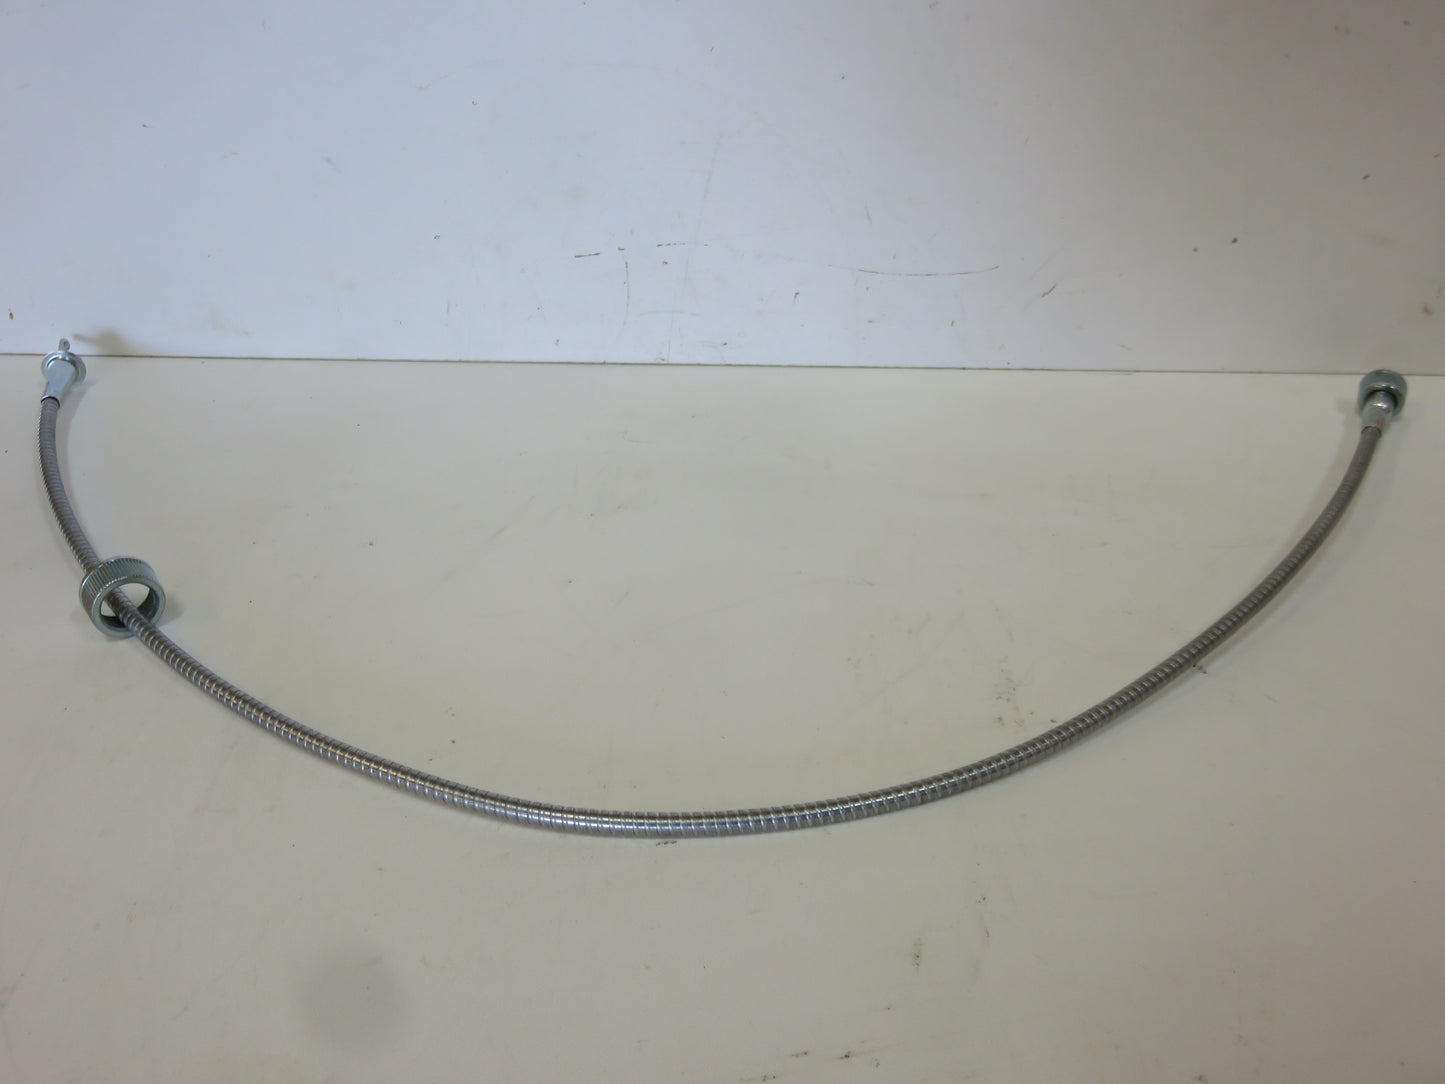 AR26721, JDS722 John Deere Reproduction Tachometer Cable For 3010, 4010, 3020, 4000, 4020, 4320